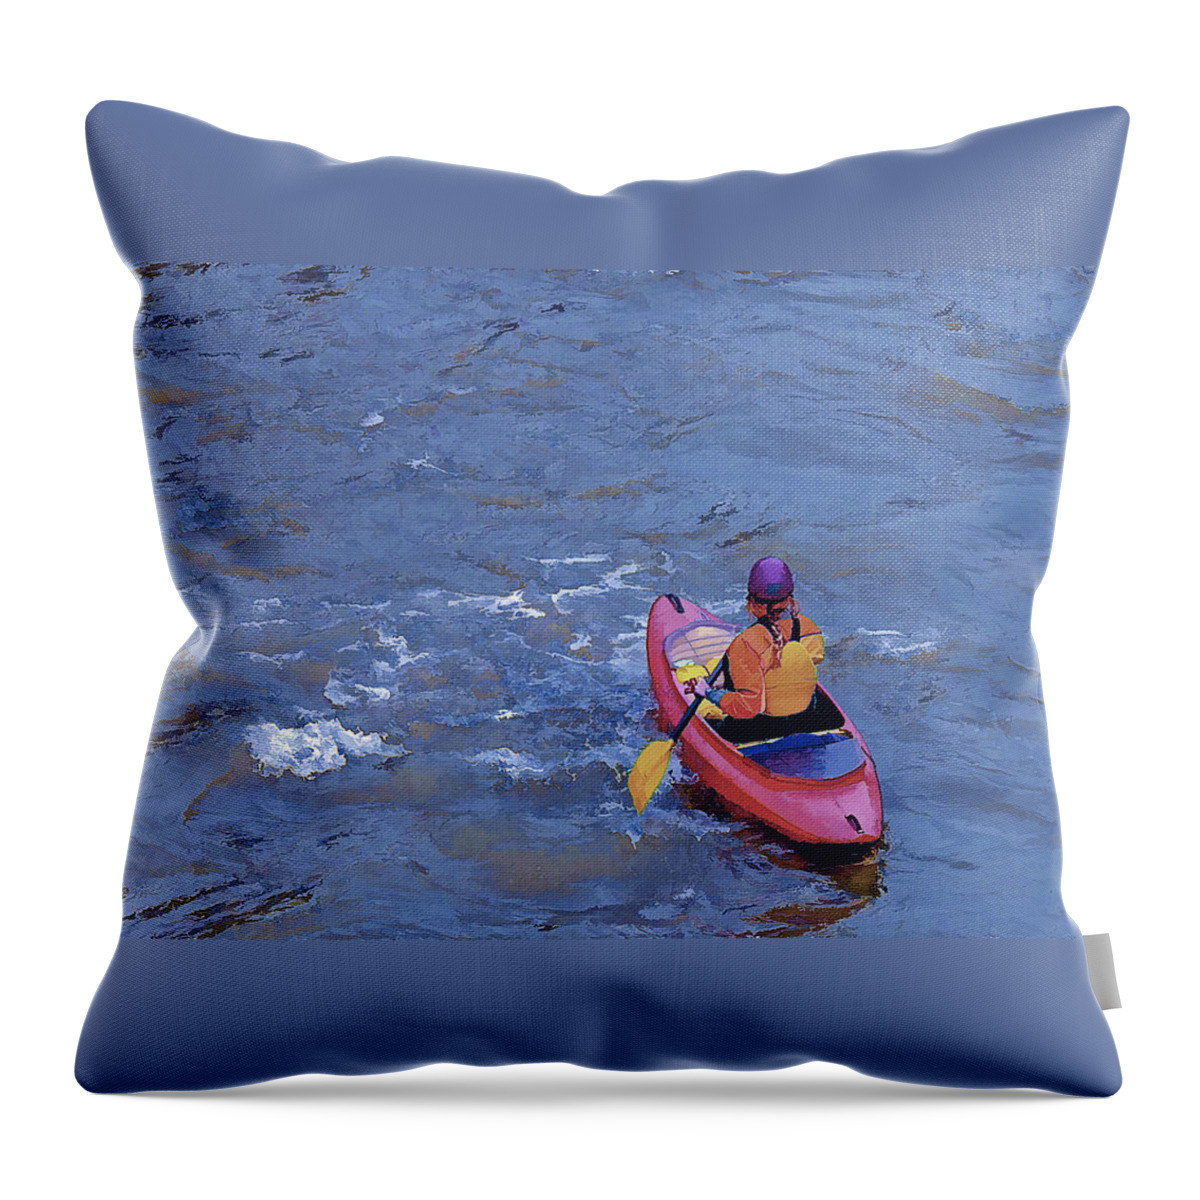  Female Throw Pillow featuring the photograph Purple Pigtails by Jack R Perry